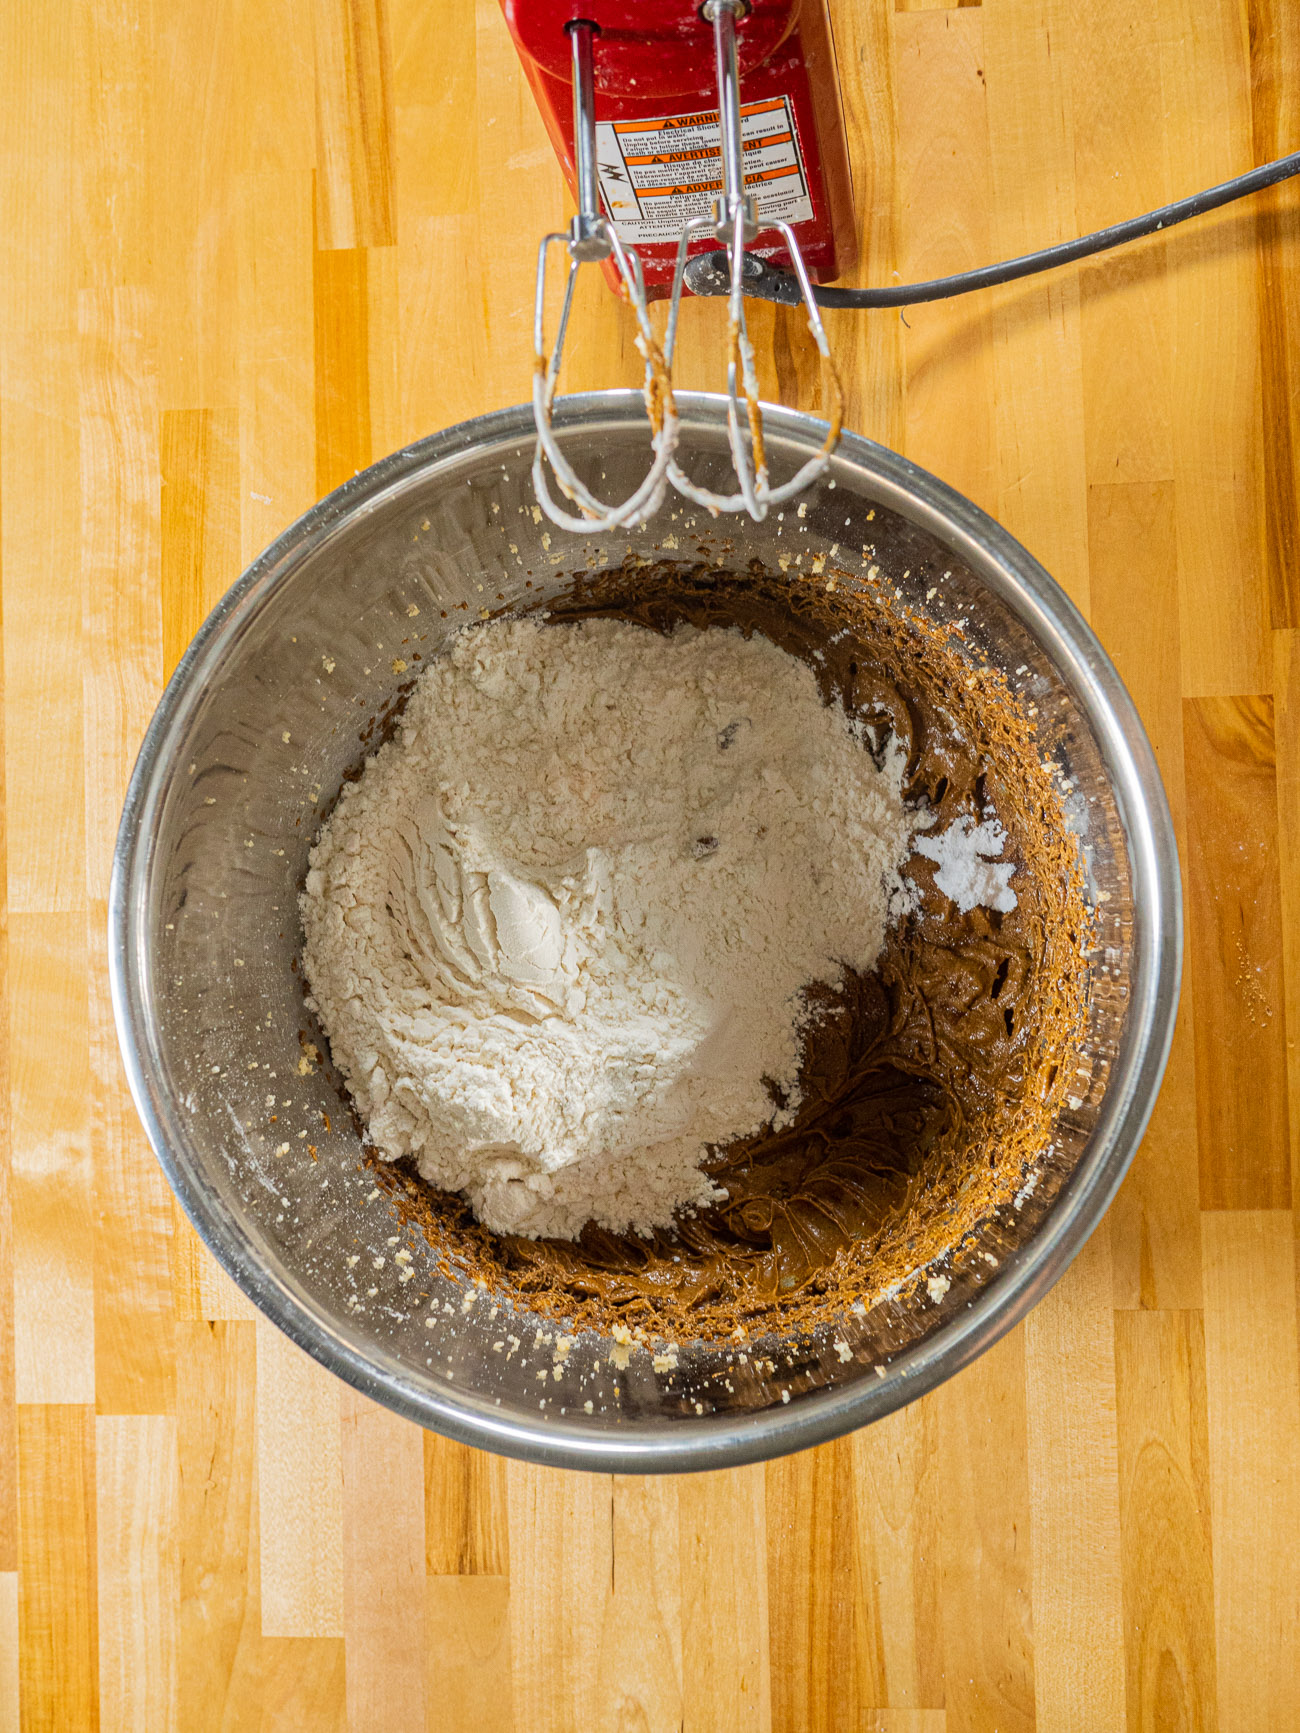 Stir in remaining ingredients and mix until dry ingredients are just combined.